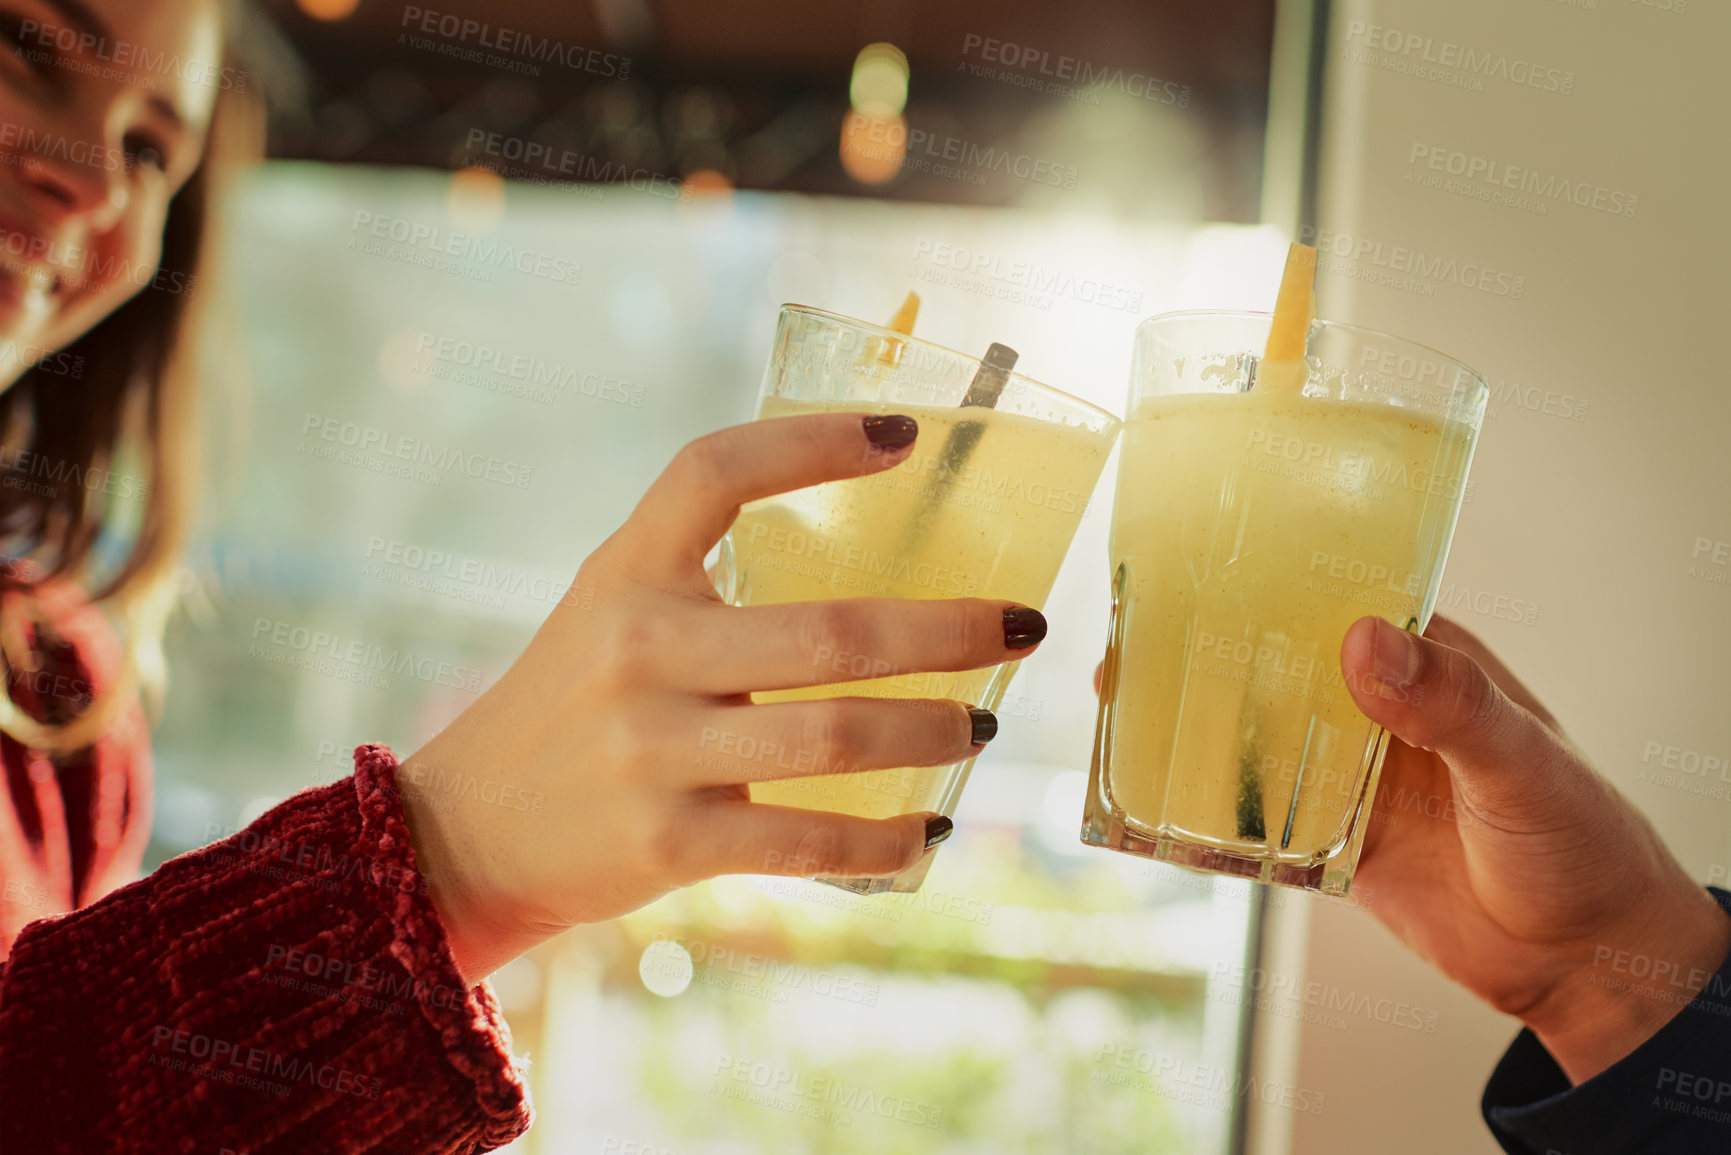 Buy stock photo Cropped shot of a young couple toasting with their drinks at a coffee shop